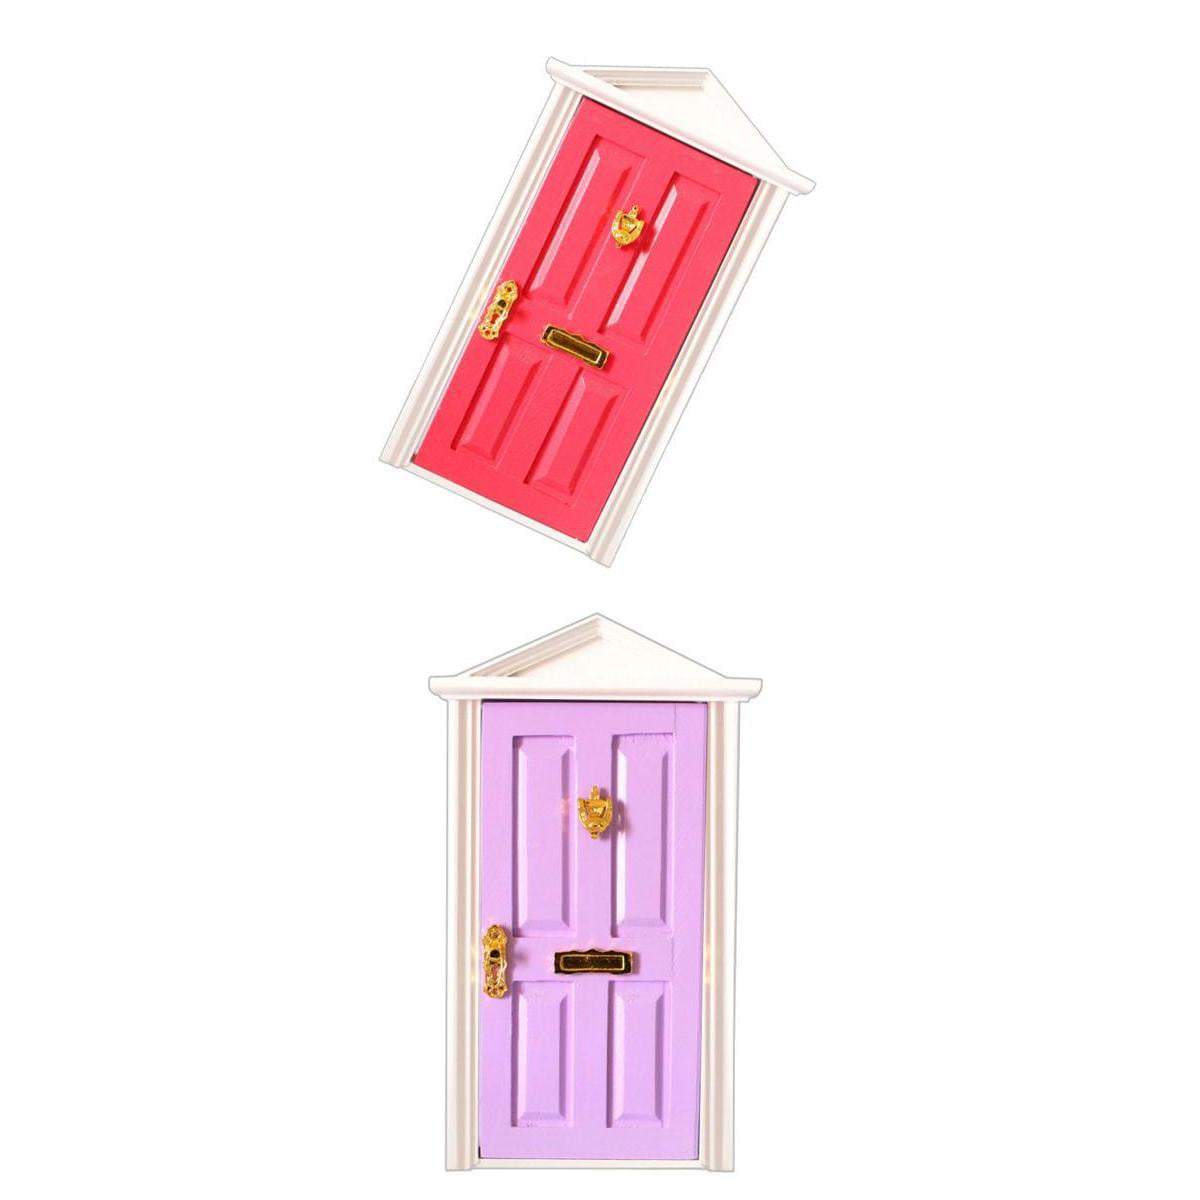 Red DIY Dollhouse Miniature Wood Fairy Door Toy With Key Metal Accessories 1:12 